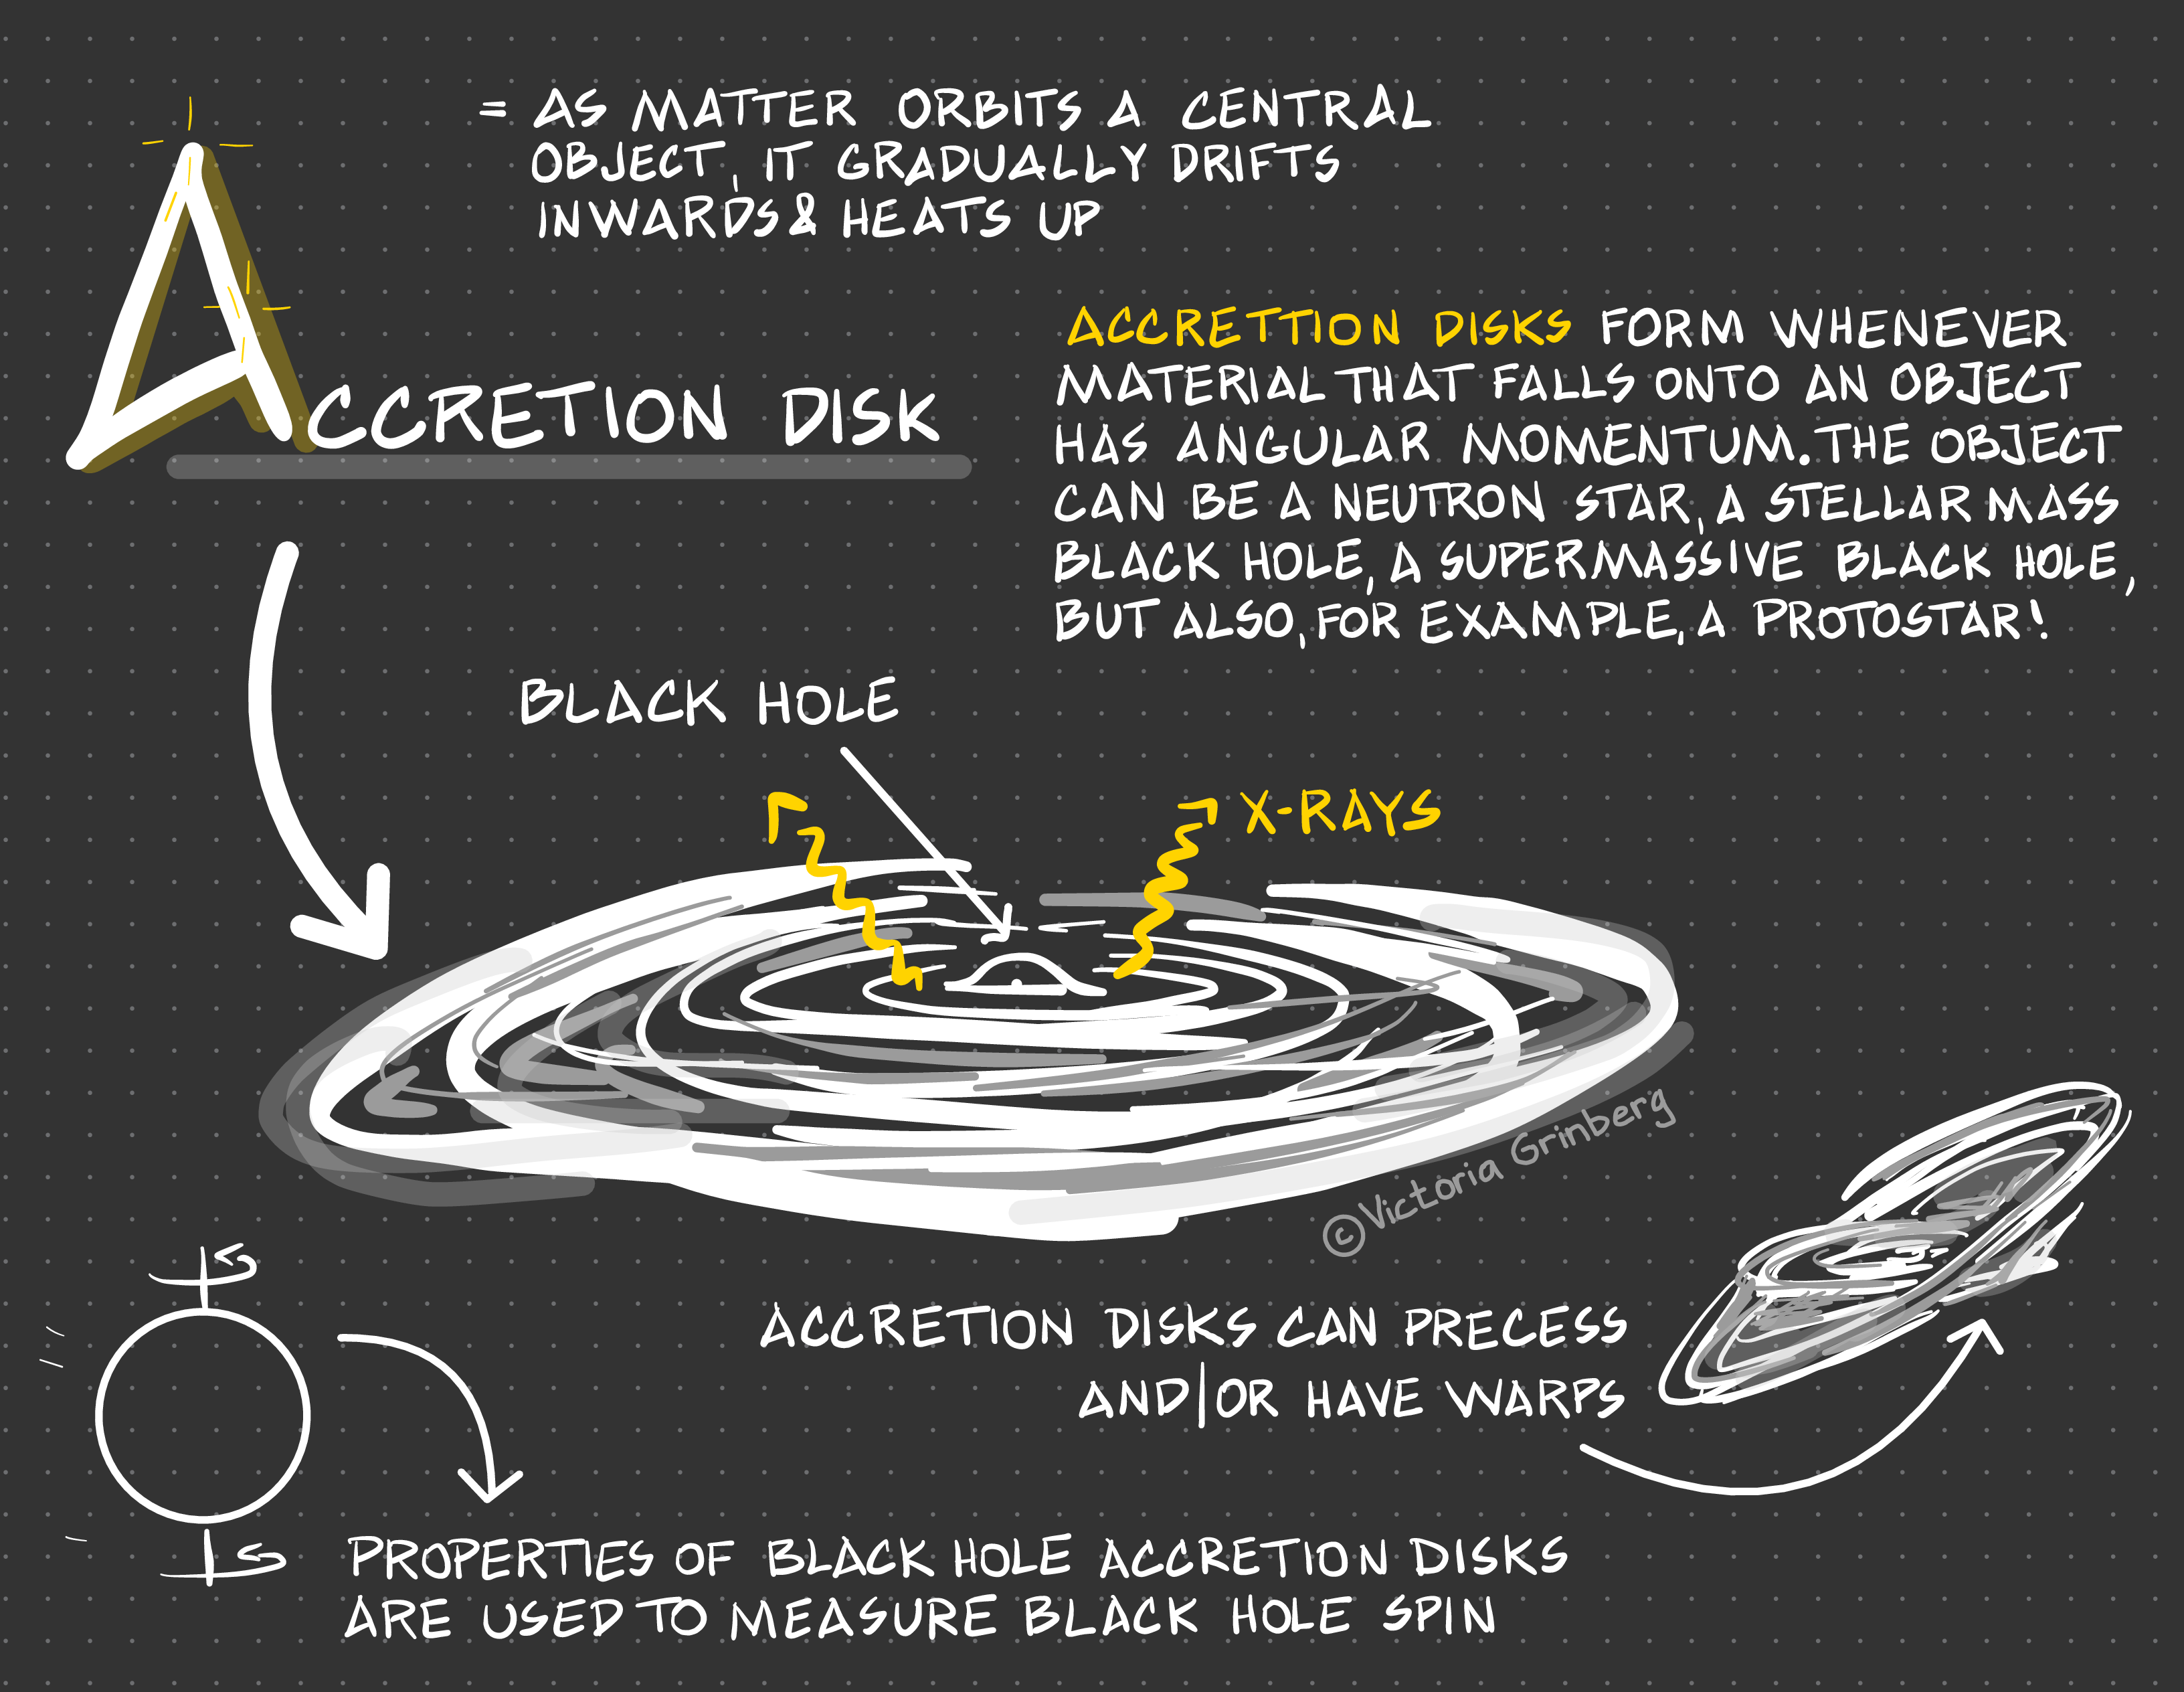 Black dotted paper with sketch of an accretion disk. 'Accretion disk', 'Black hole' in the middle and 'X-rays' coming from the center of the disk labelled. Two text boxes:' = as matter orbits a central object, it gradually drifts inwards & heats up''Accretion disks form whenever material that falls onto an object has angular momentum. The object can be a neutron star, a stellar mass black hole, a supermassive black hole, but also, for example, a protostar!' Small doodle of a warped accretion disk labelled 'Accretion disks can precess and/or have warps' Small doodle of rotating black hole labelled 'properties of black hole accretion disks are used to measure black hole spin'